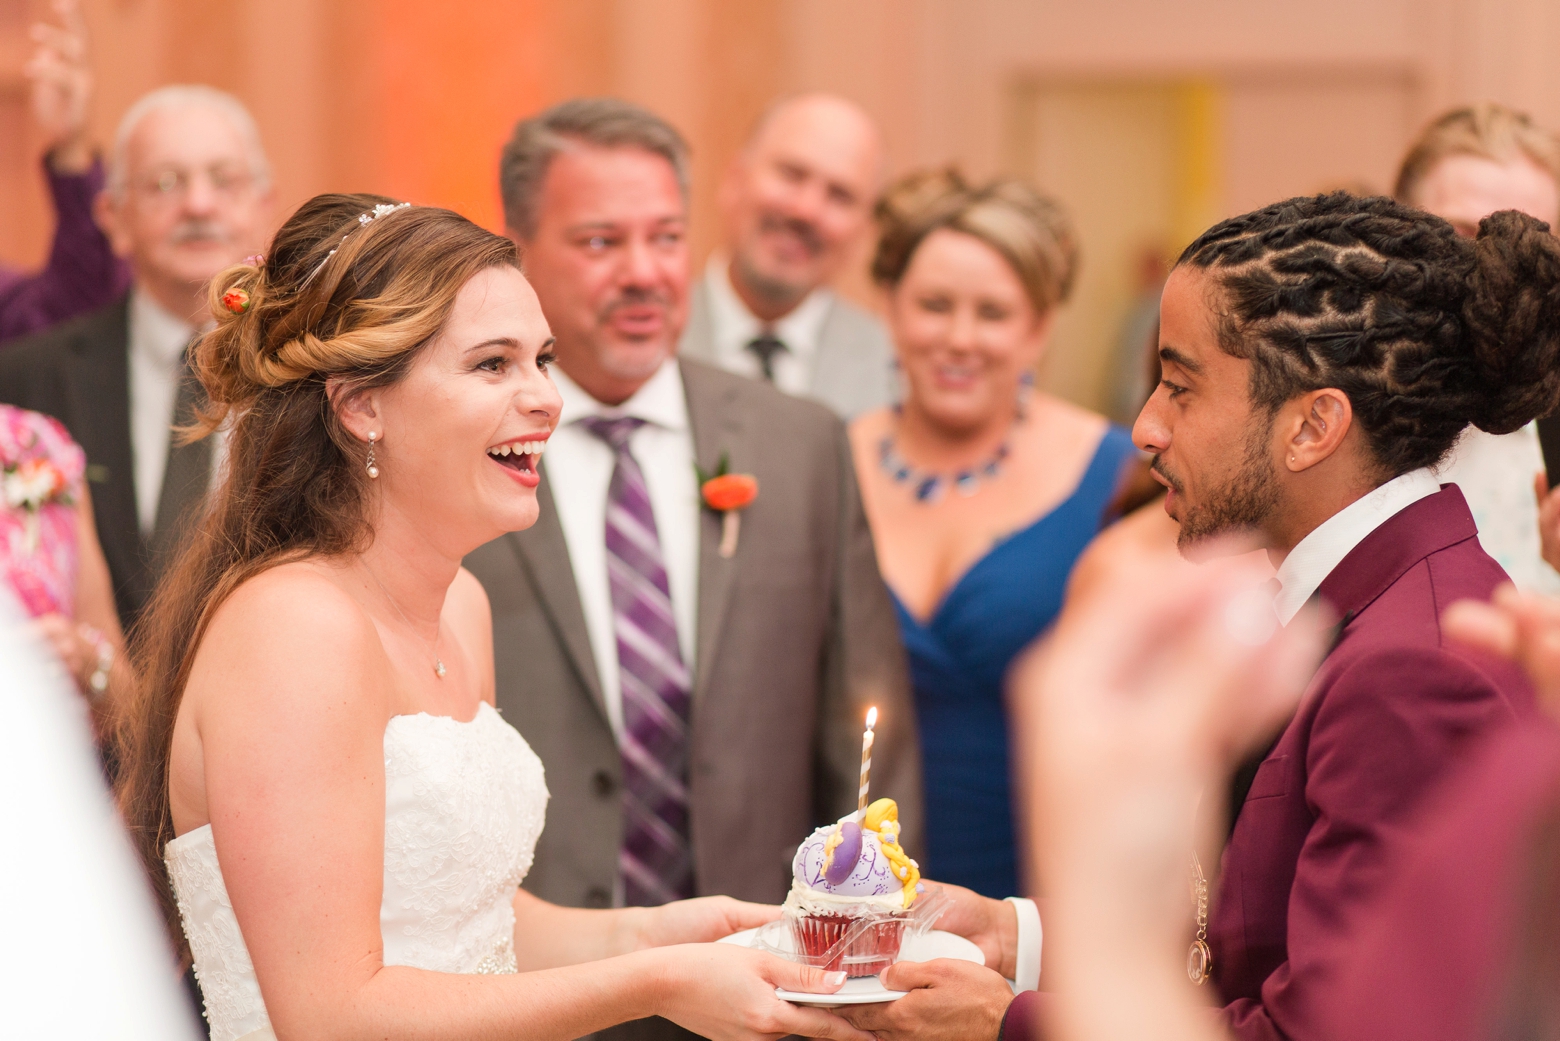  Founders Inn Wedding Virginia Beach by Angie McPherson Photography. Click through to see this Disney Tangled inspired wedding!